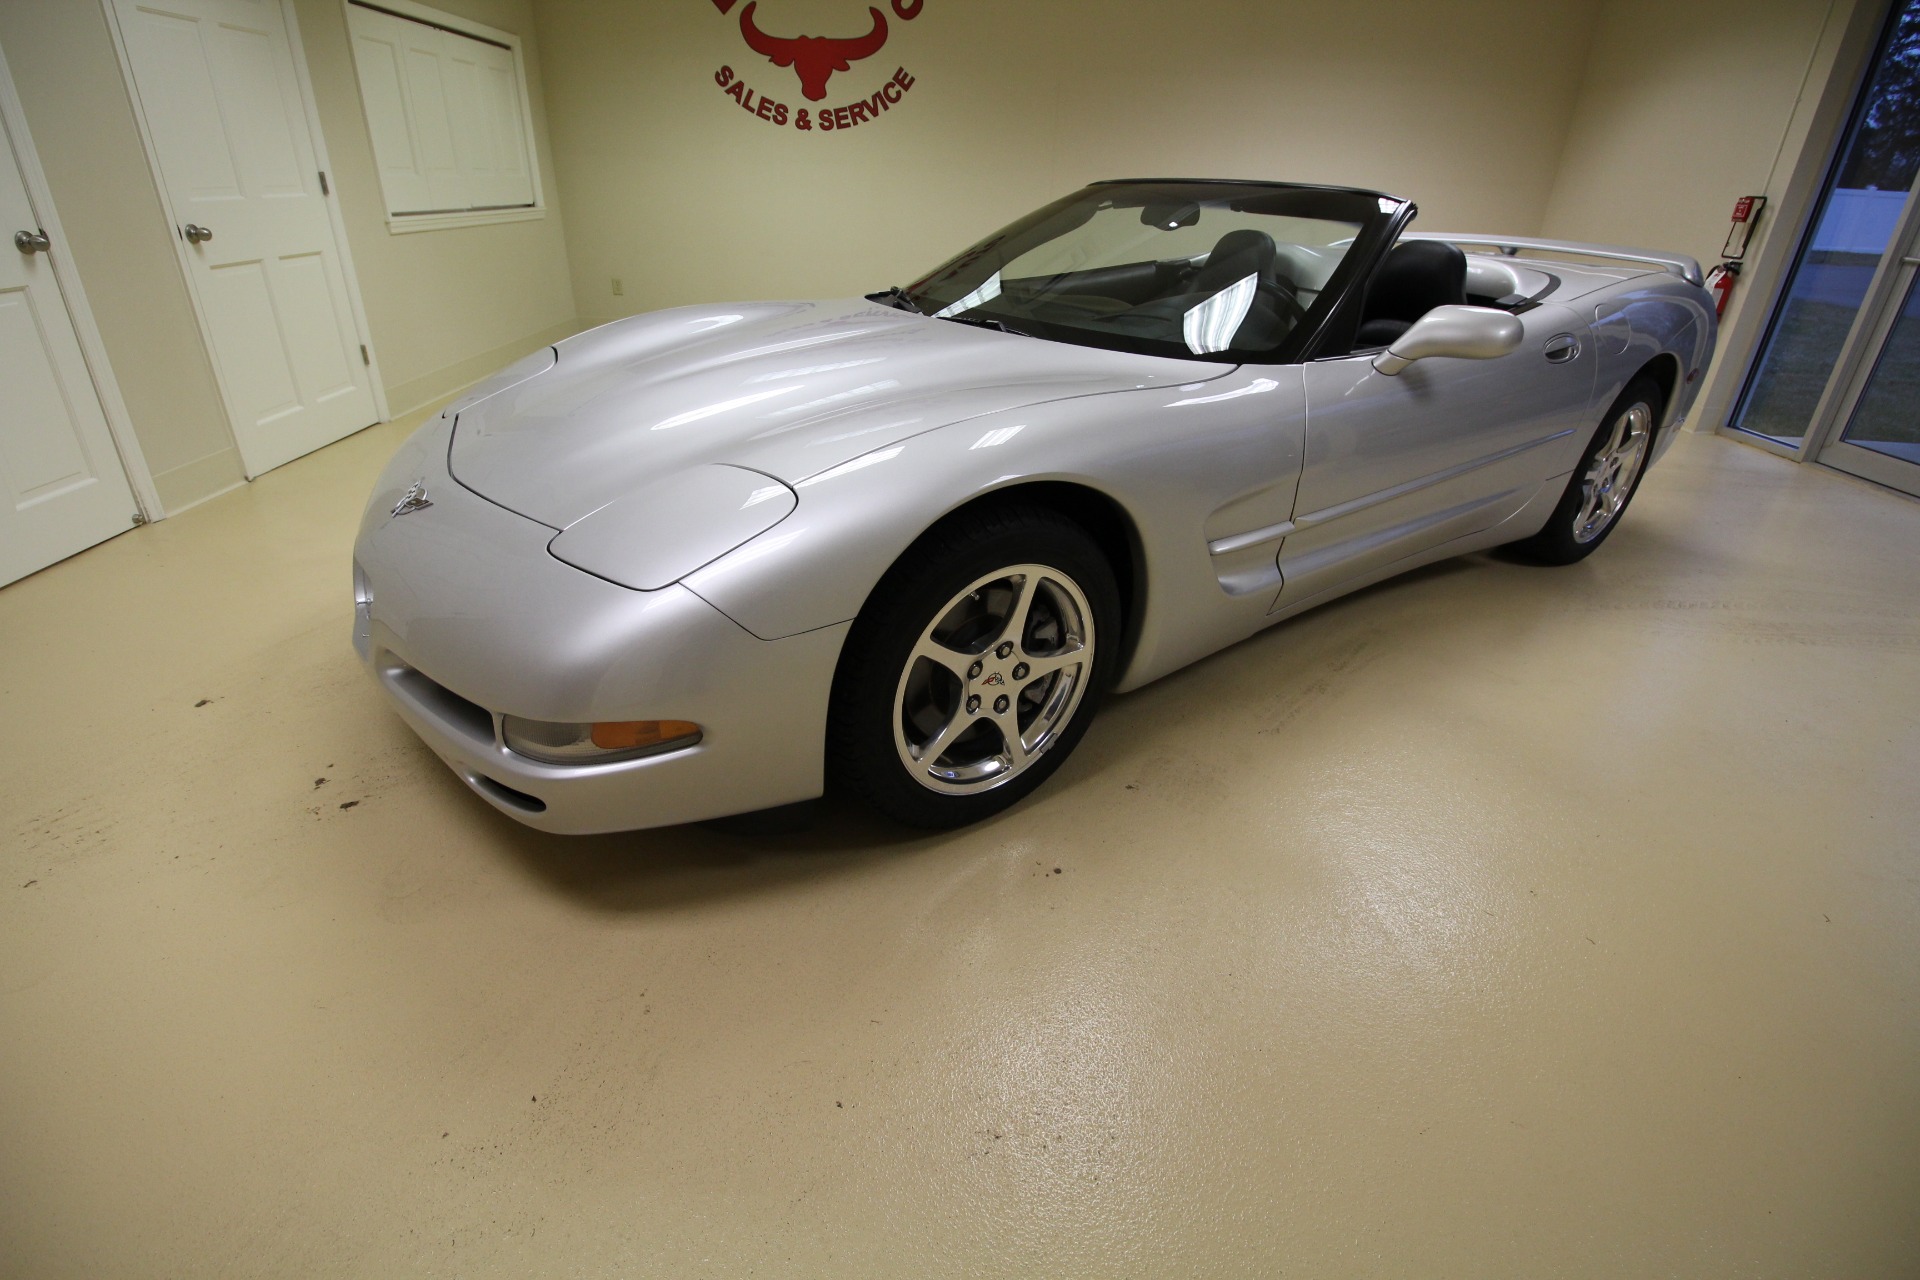 Used 2003 Quicksilver Metallic with Black Soft Top Chevrolet Corvette Convertible | Albany, NY